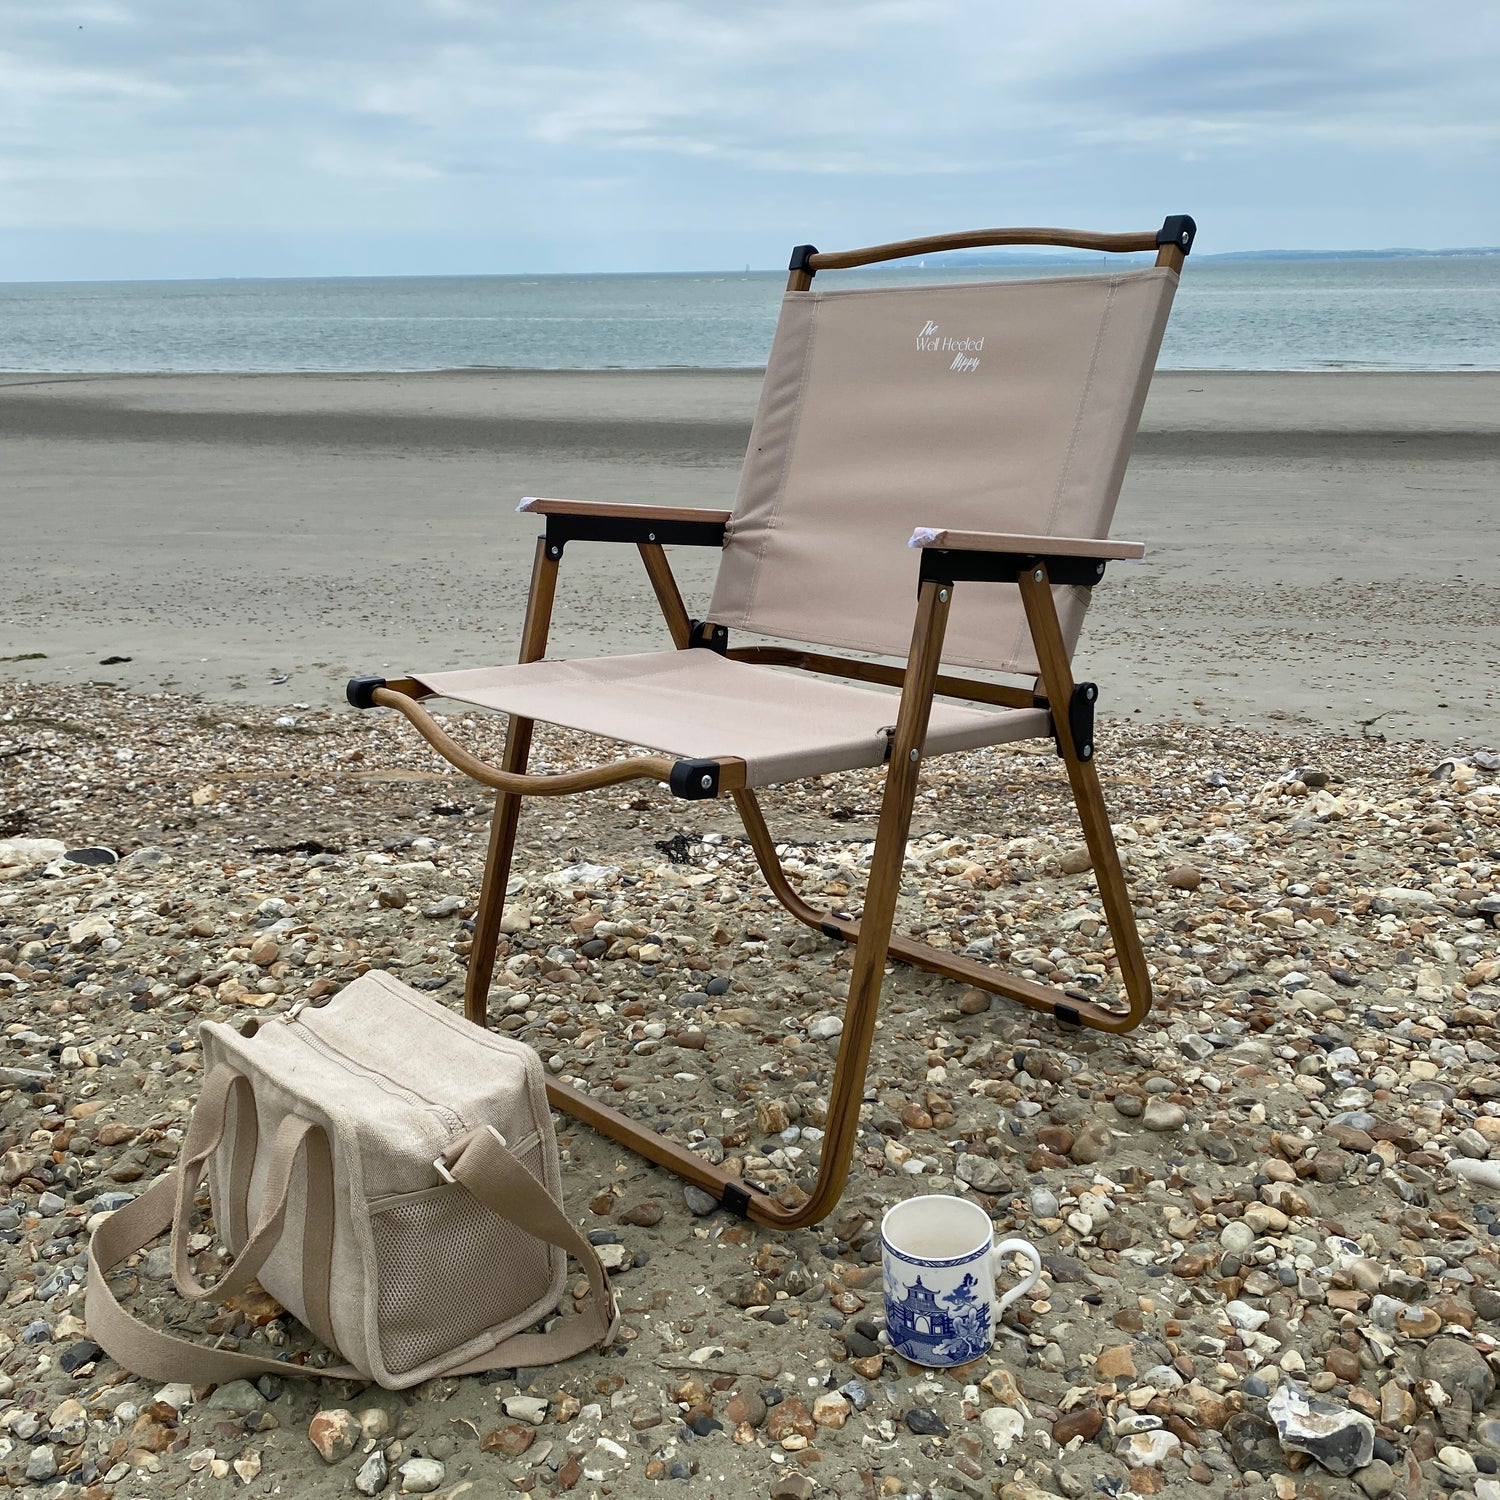 A lightweight, foldable, stylish camping chair by The Well Heeled Hippy, pictured here as a picnic chair on a pebbly beach, in beige